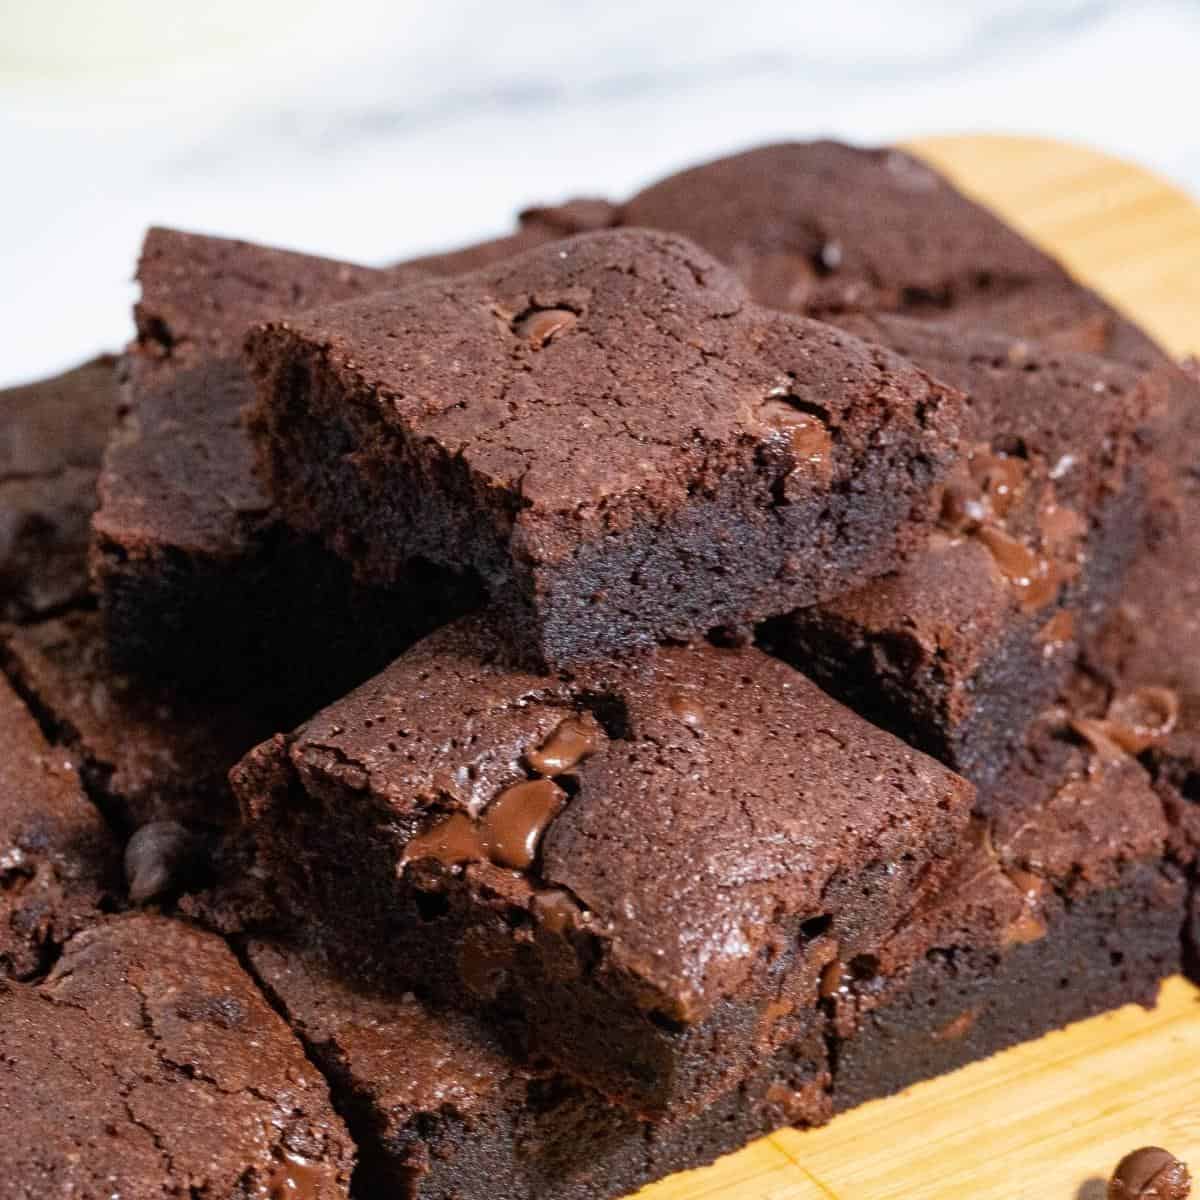 Brownie squares on a wooden board.